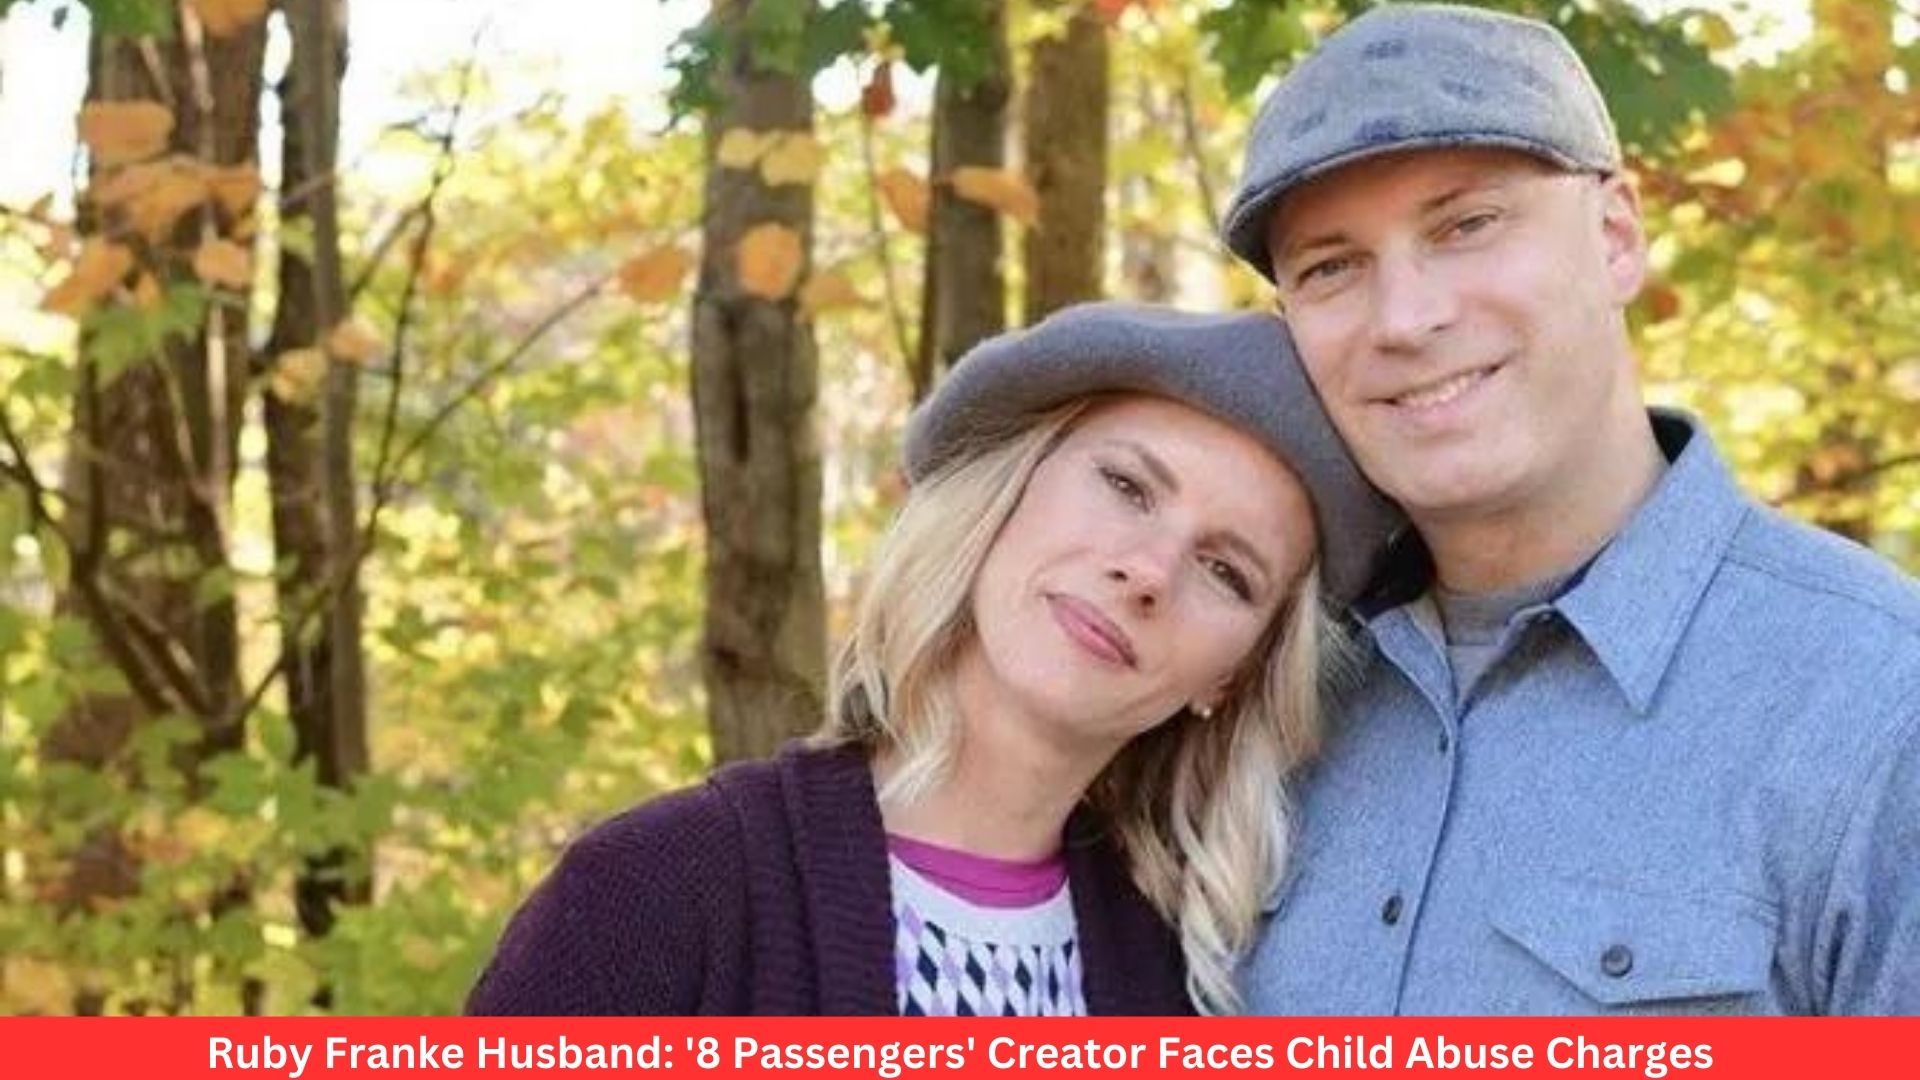 Ruby Franke Husband: '8 Passengers' Creator Faces Child Abuse Charges